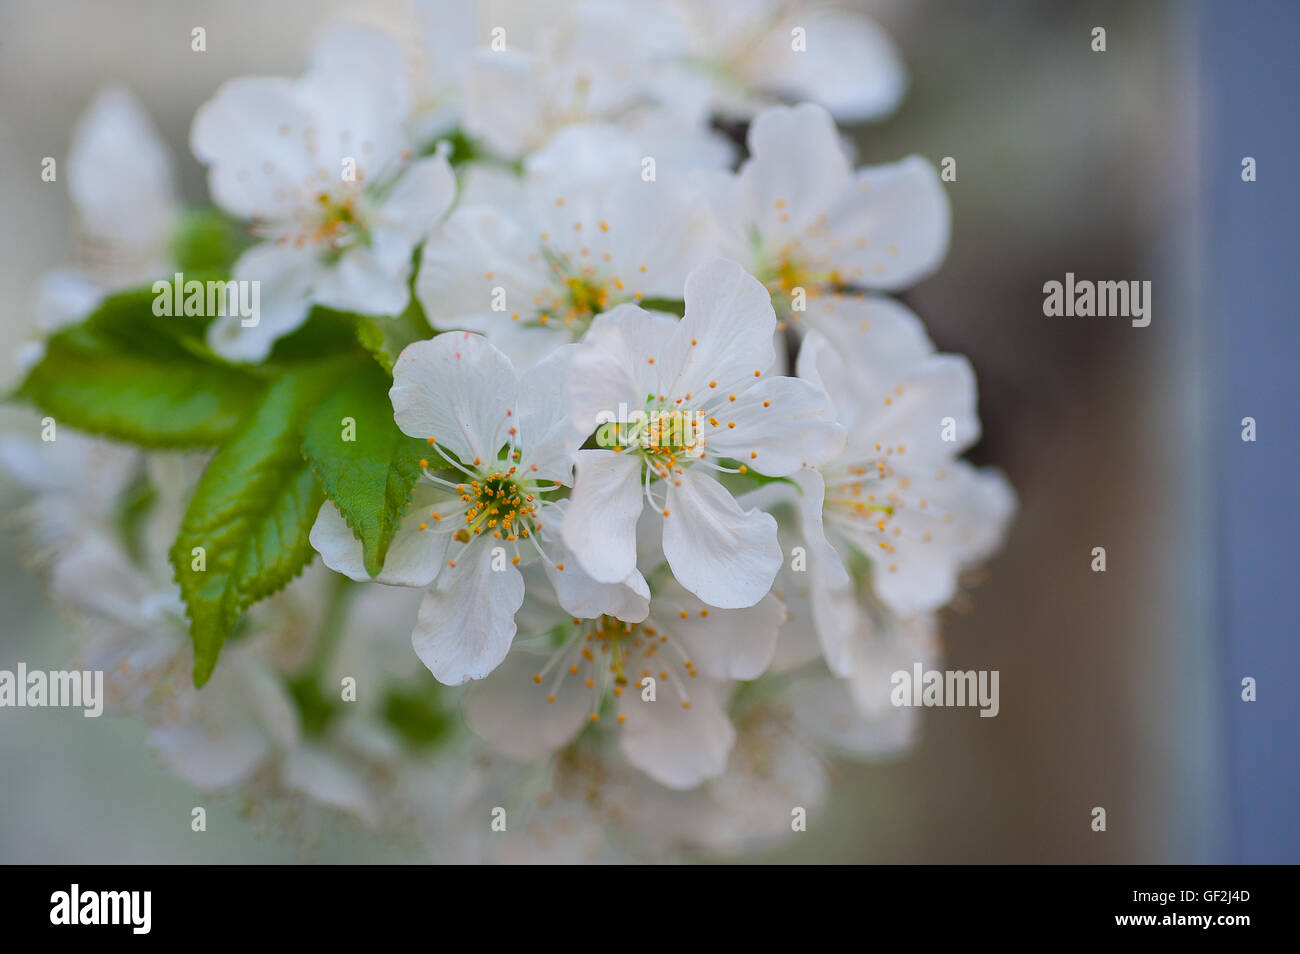 photo of blossoming tree brunch with white flowers Stock Photo